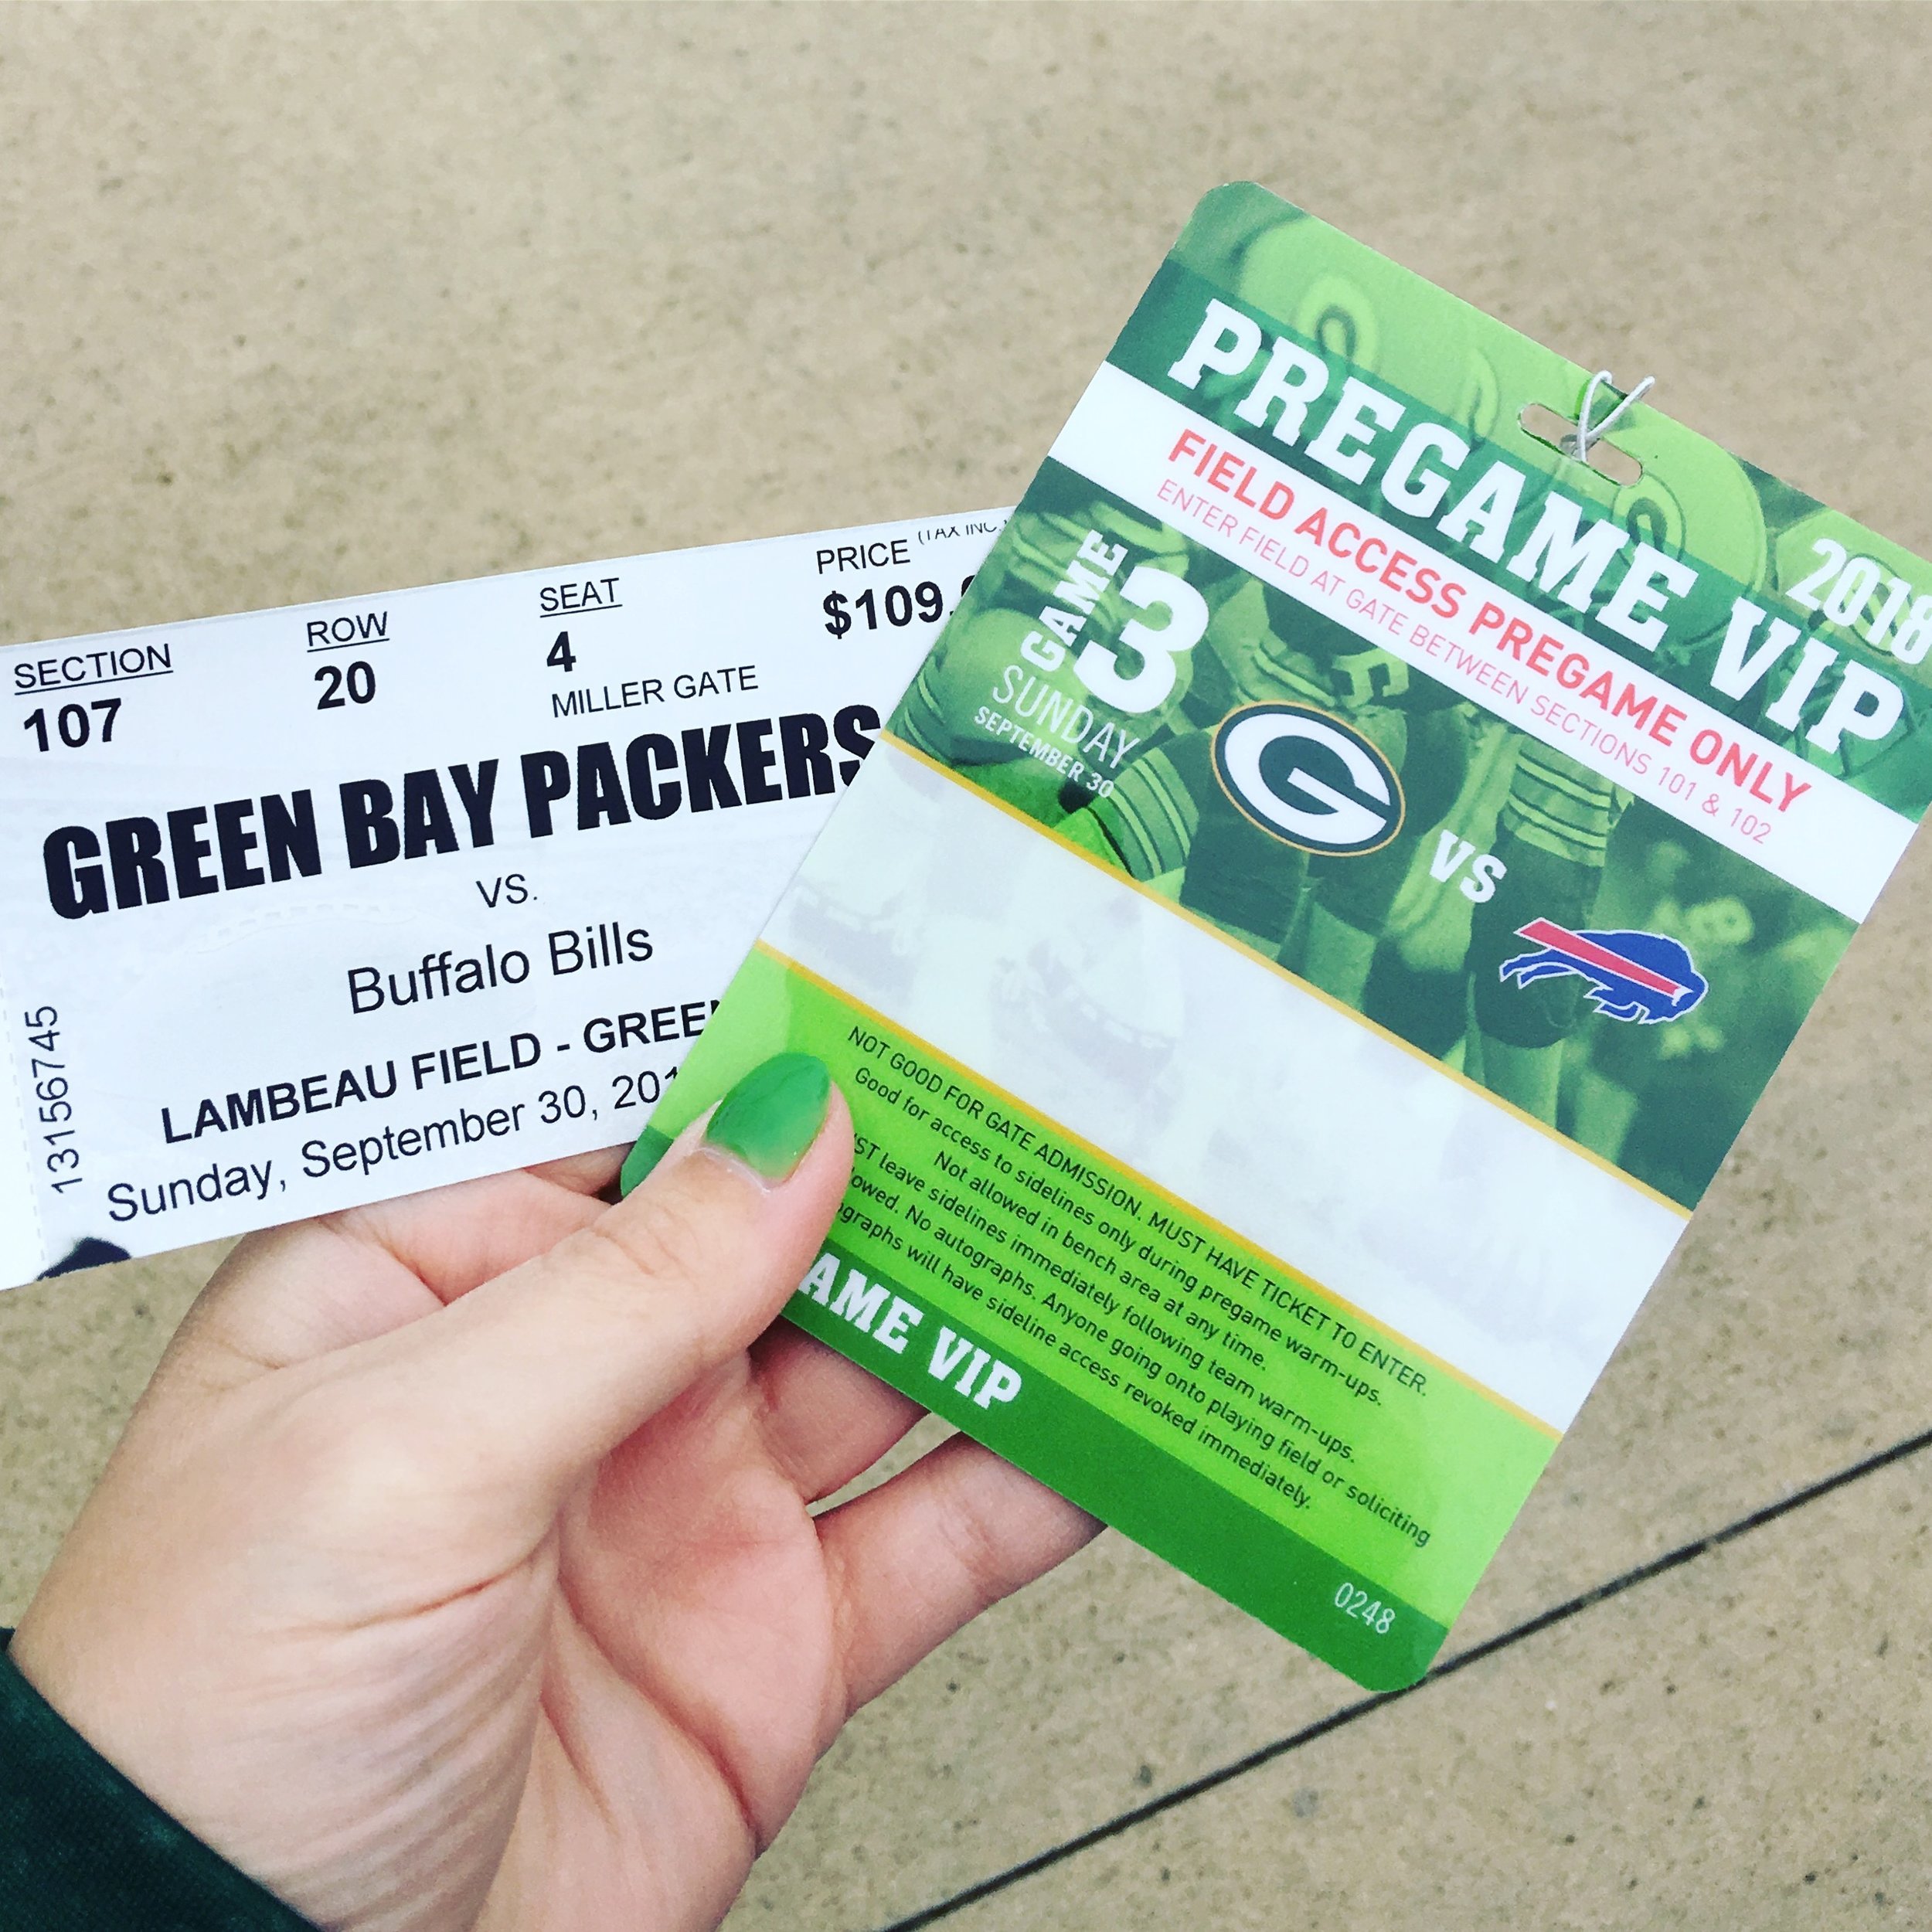 My Lambeau Field engagement — Live the Movies